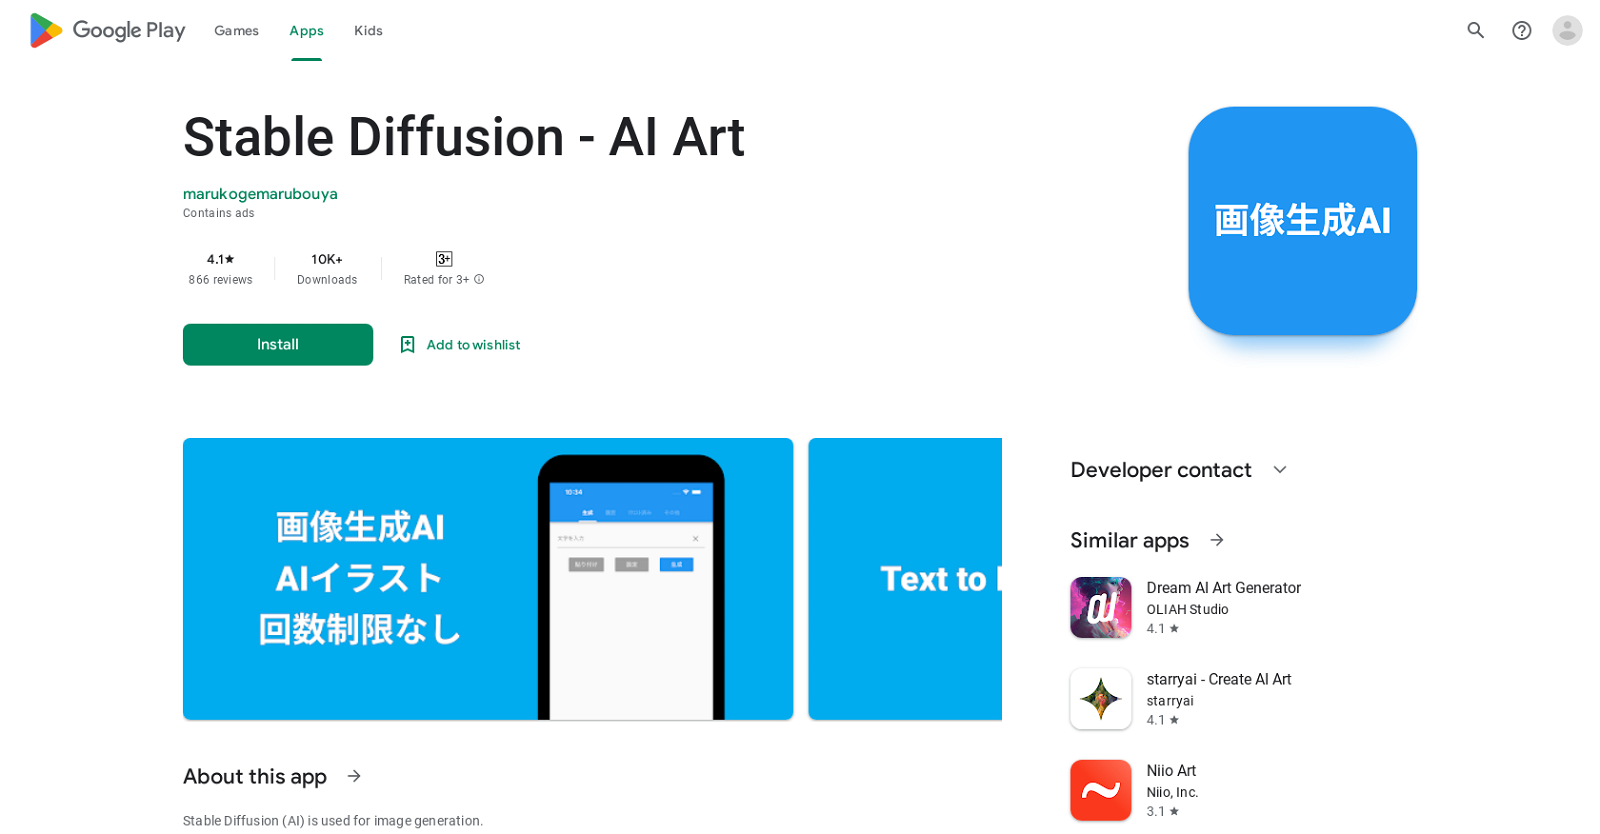 Stable Diffusion - AI Art website